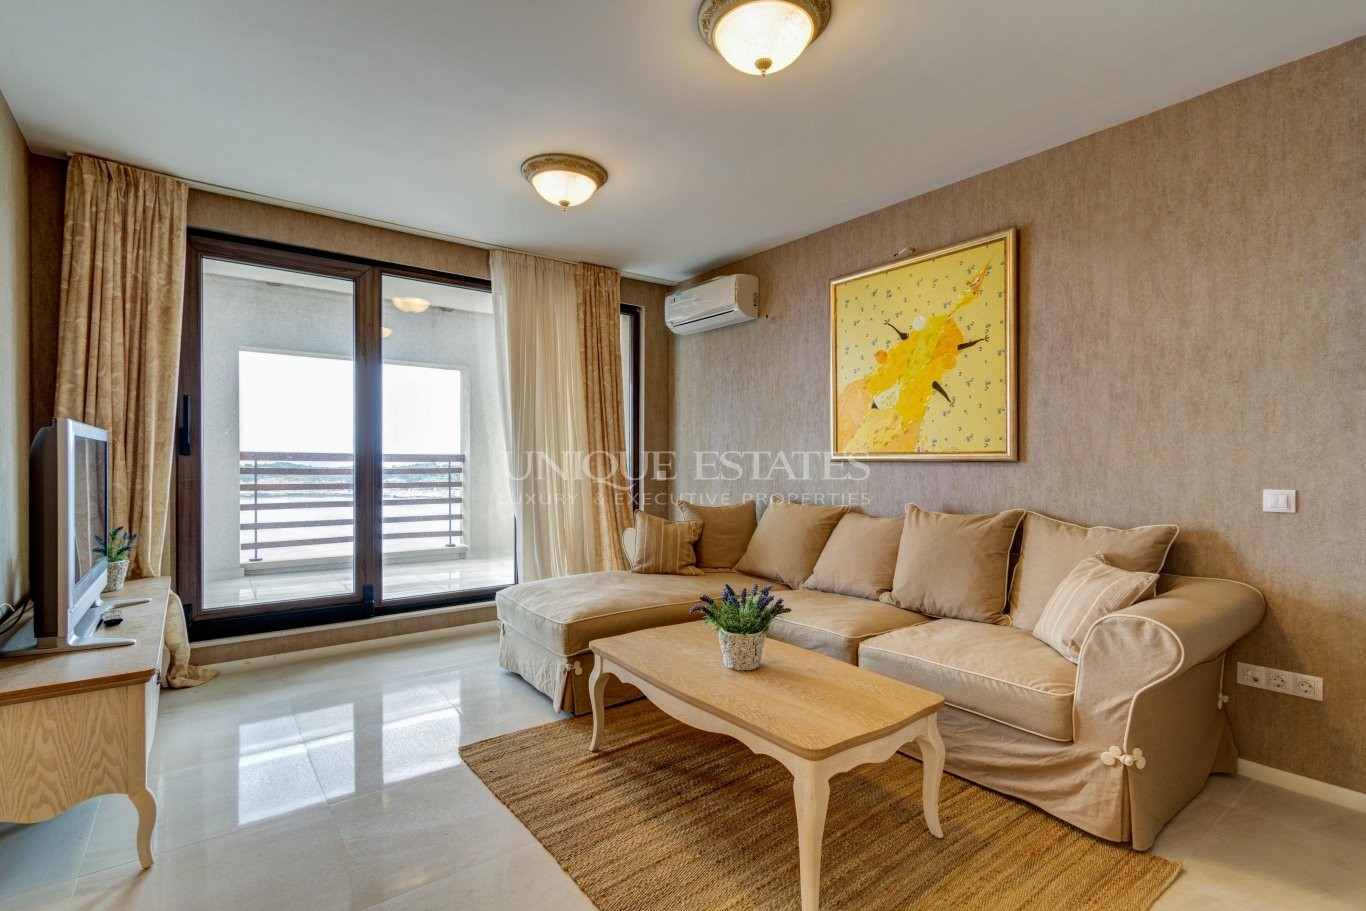 Apartment for sale in Lozenets,  with listing ID: K4774 - image 1